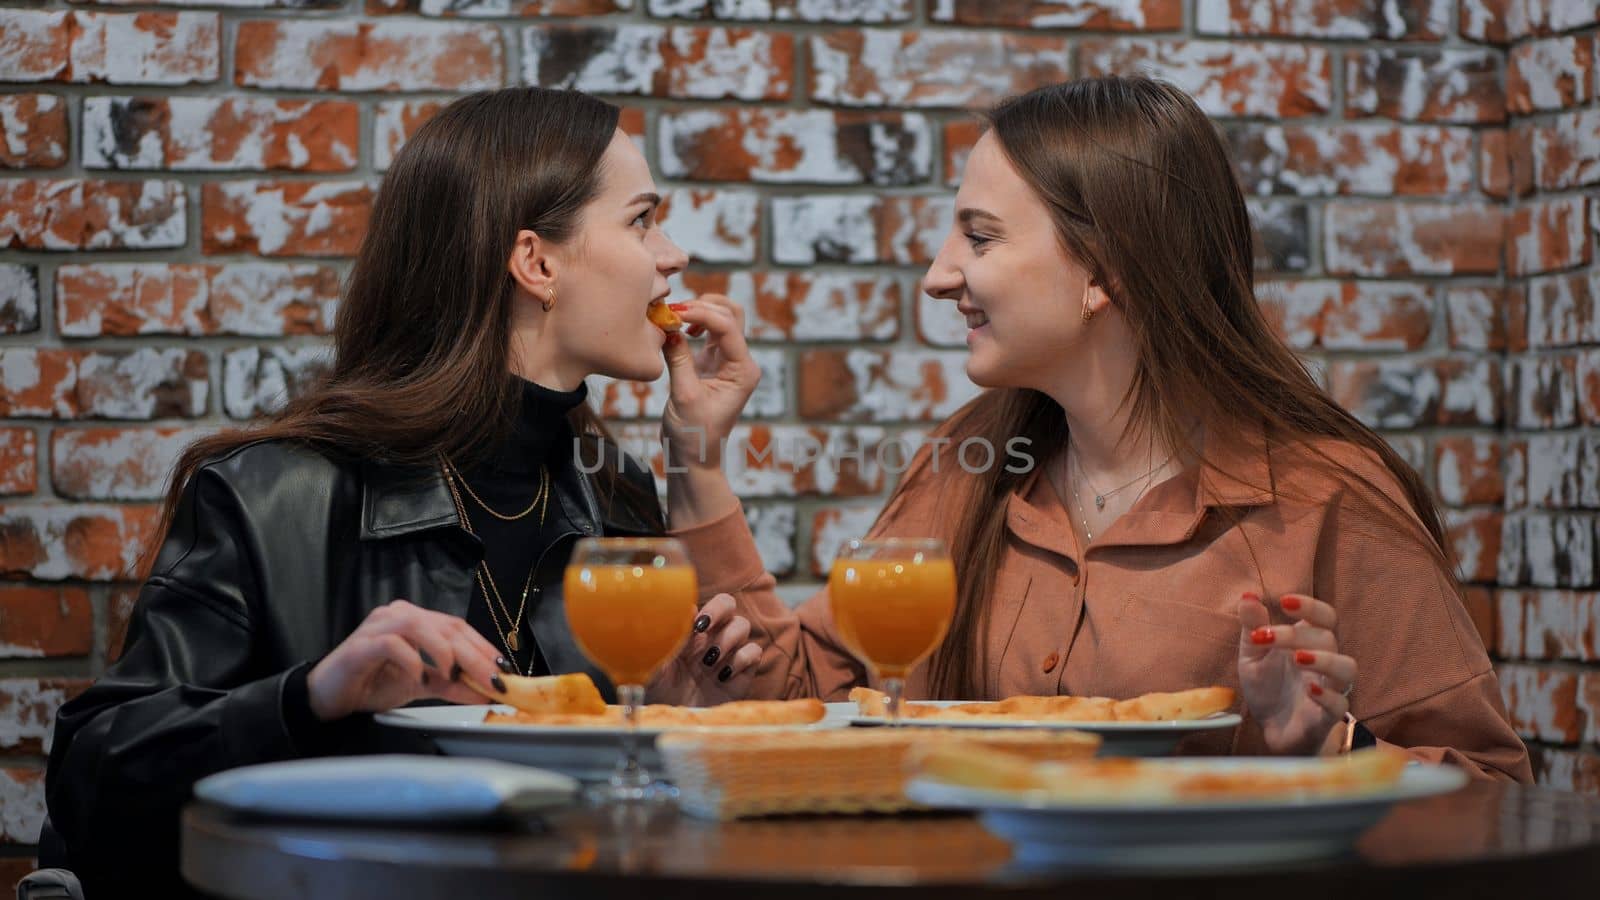 Young girls eat in a cafe and feed each other. by DovidPro